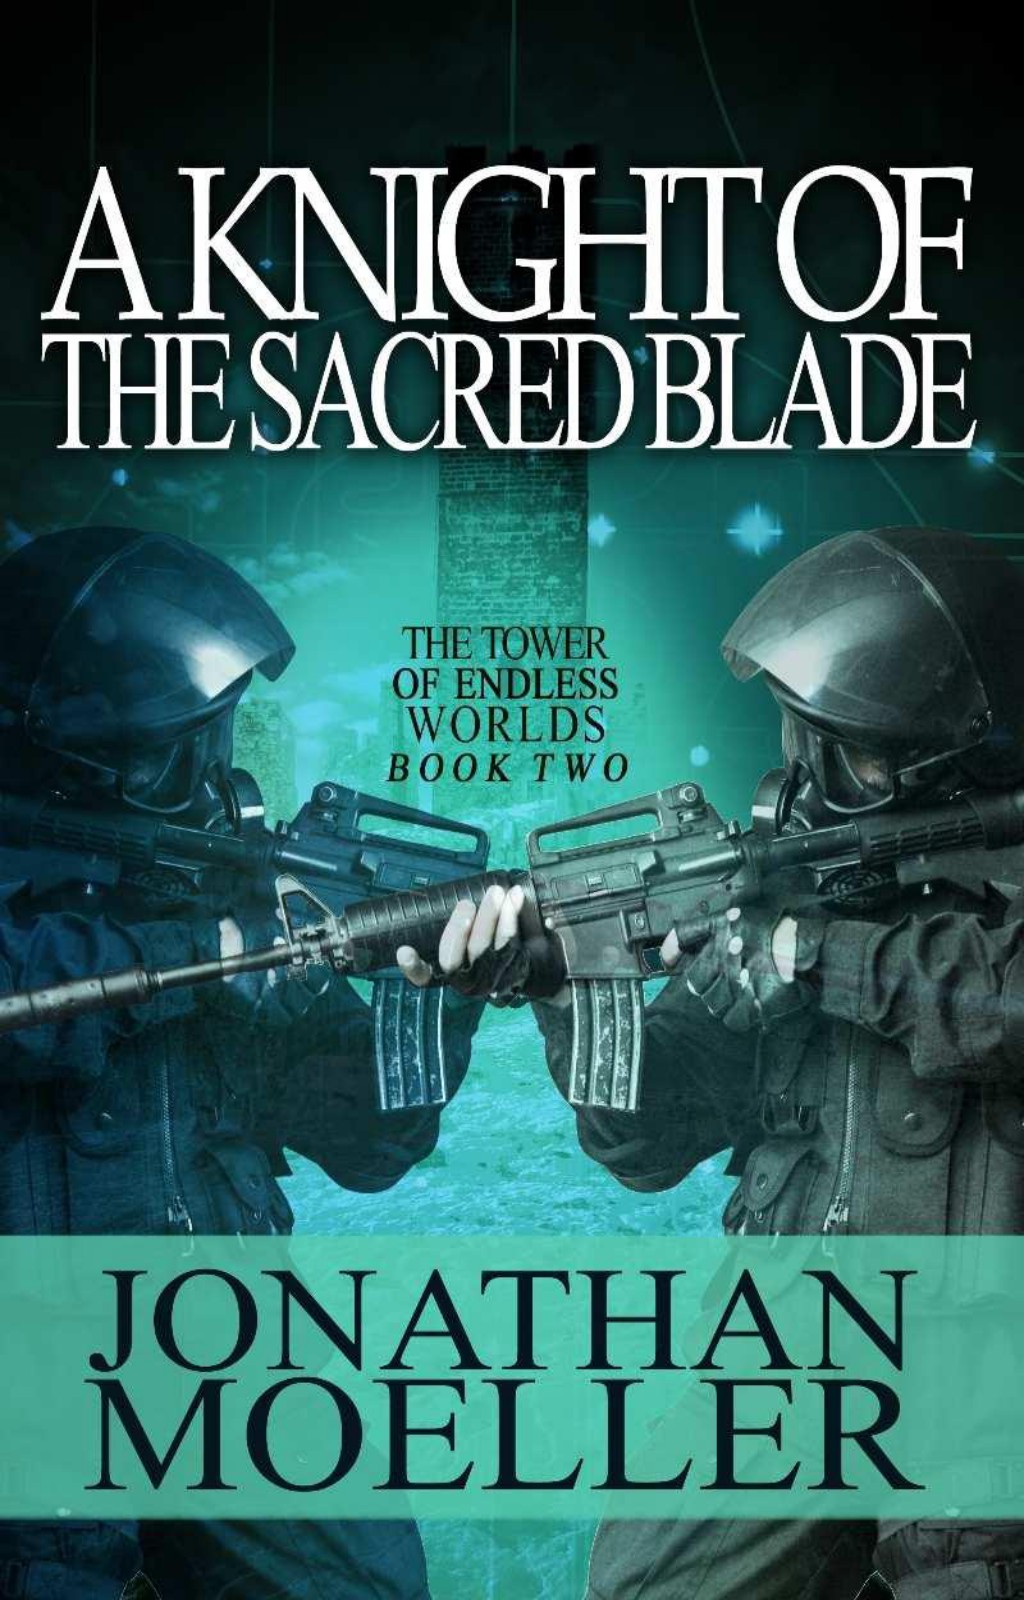 A Knight of the Sacred Blade by Jonathan Moeller